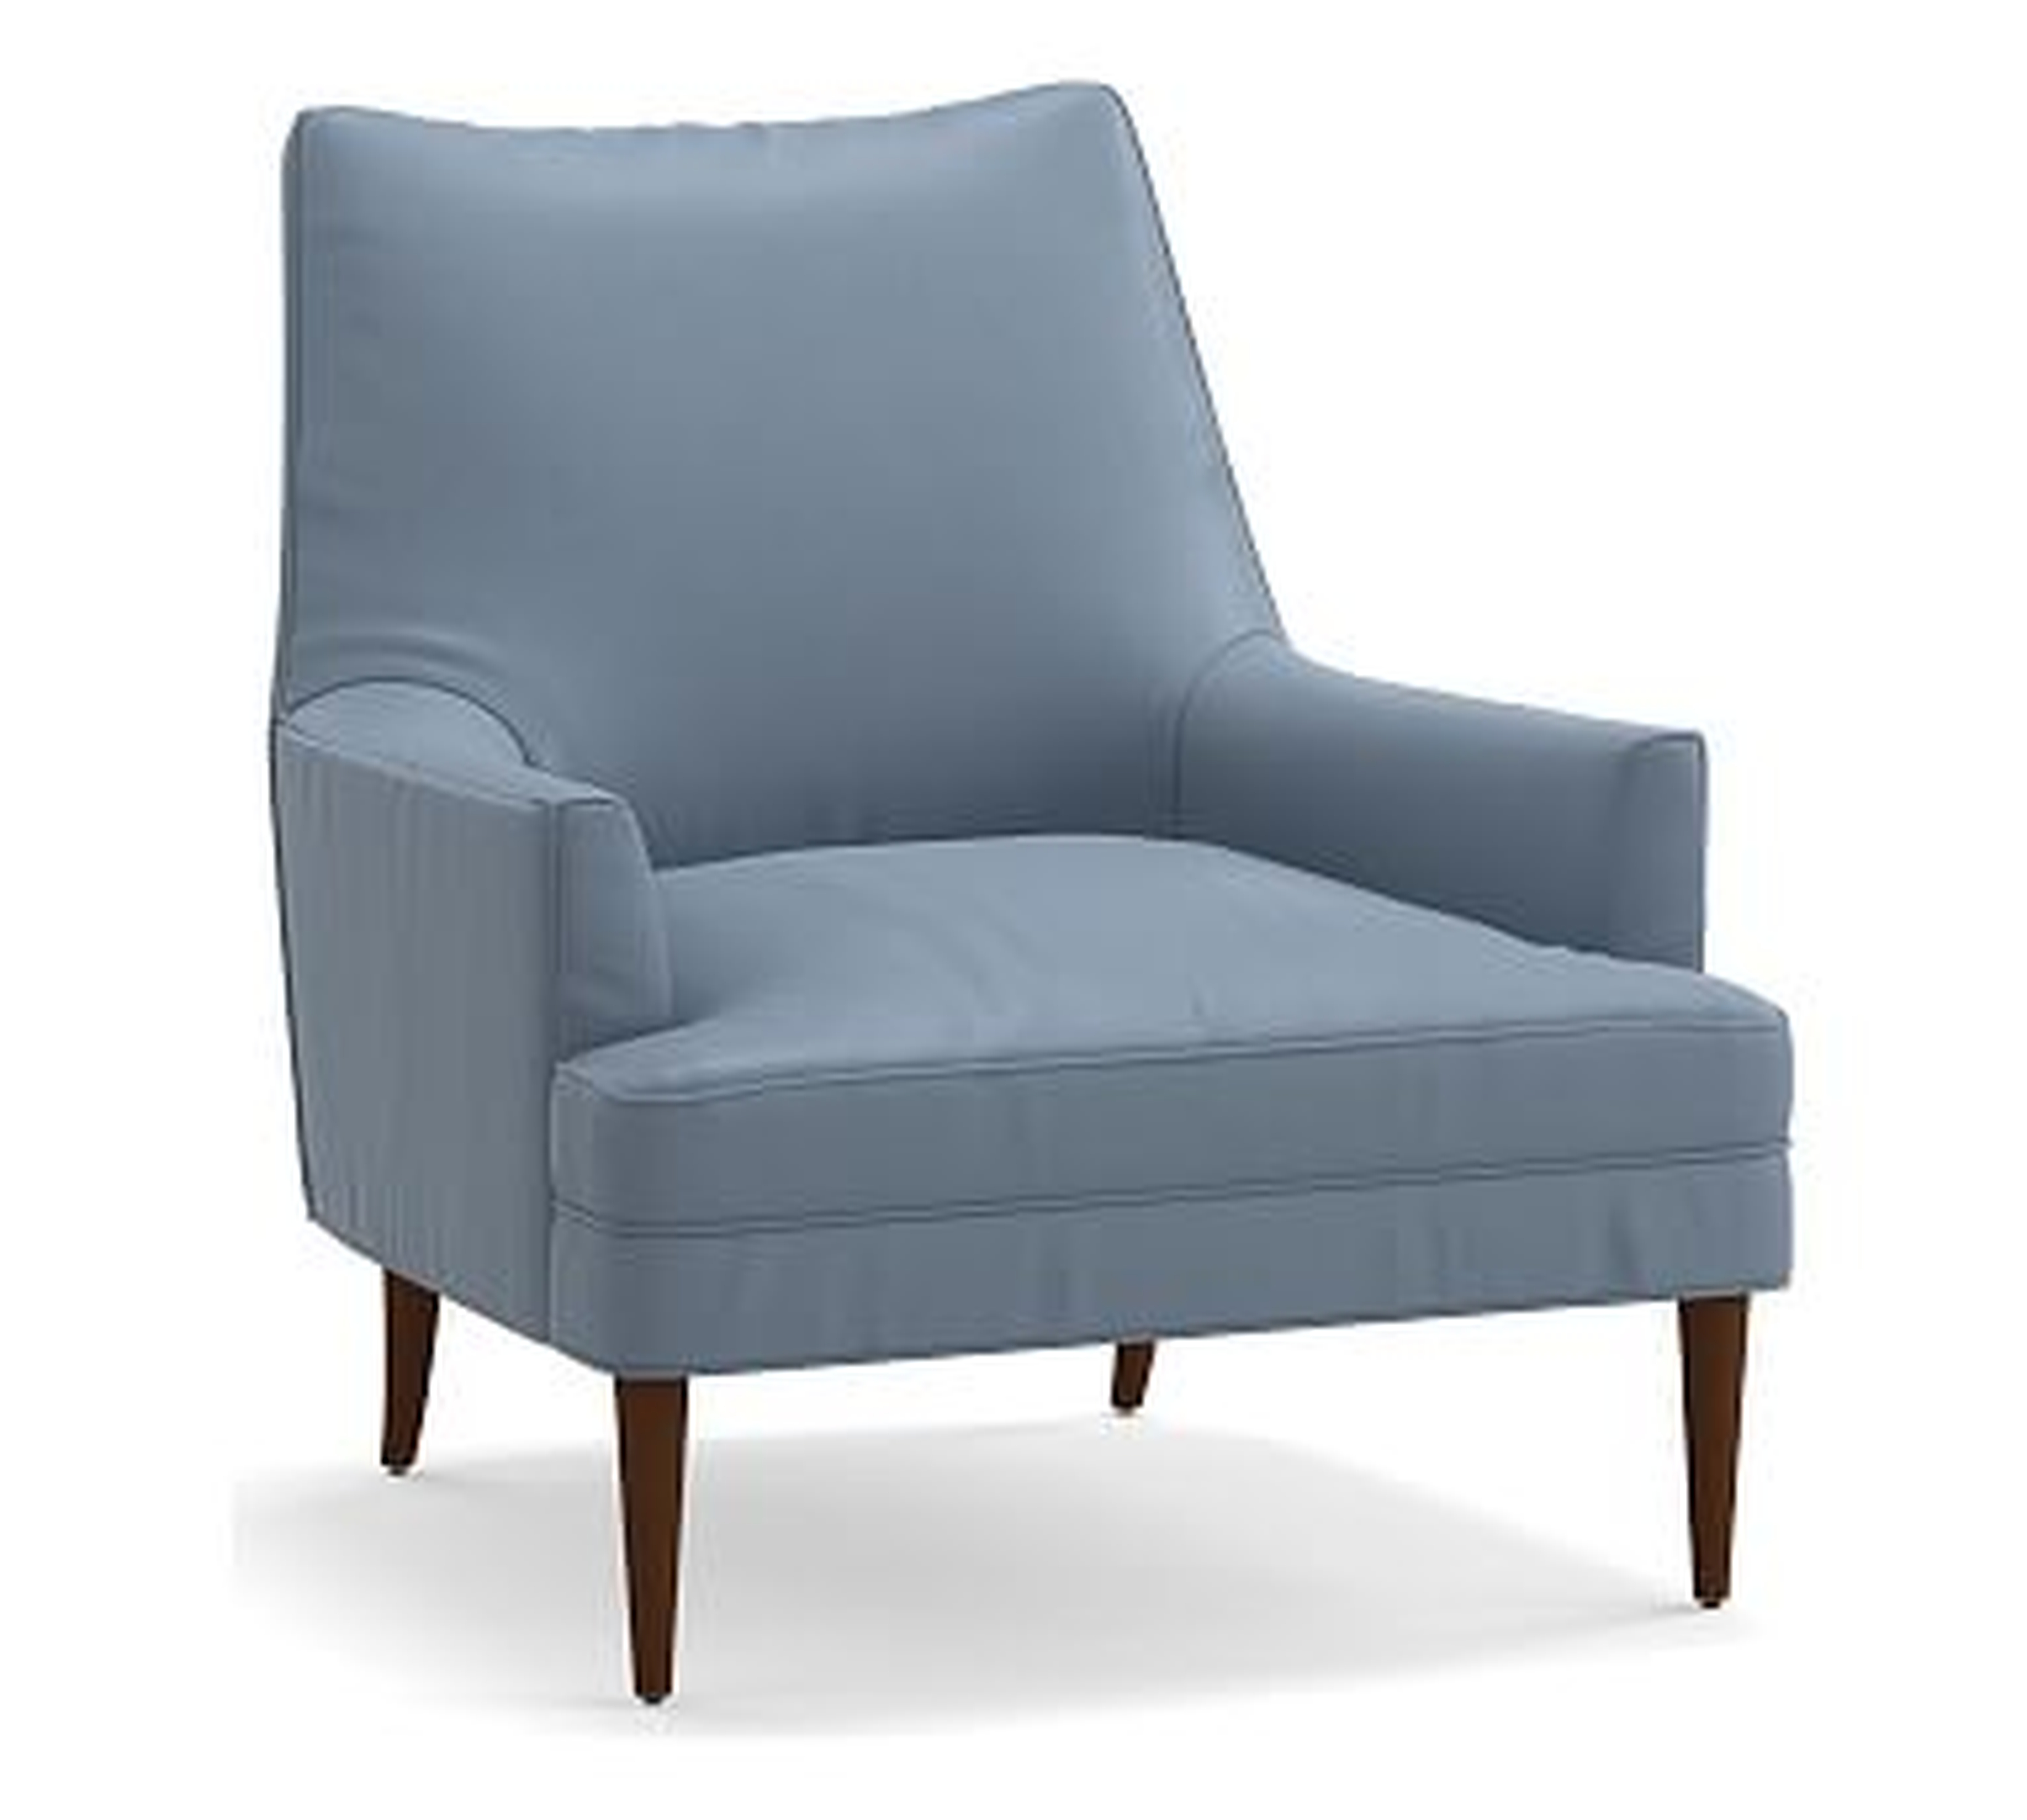 Reyes Leather Armchair, Polyester Wrapped Cushions, Signature Adriatic Blue - Pottery Barn